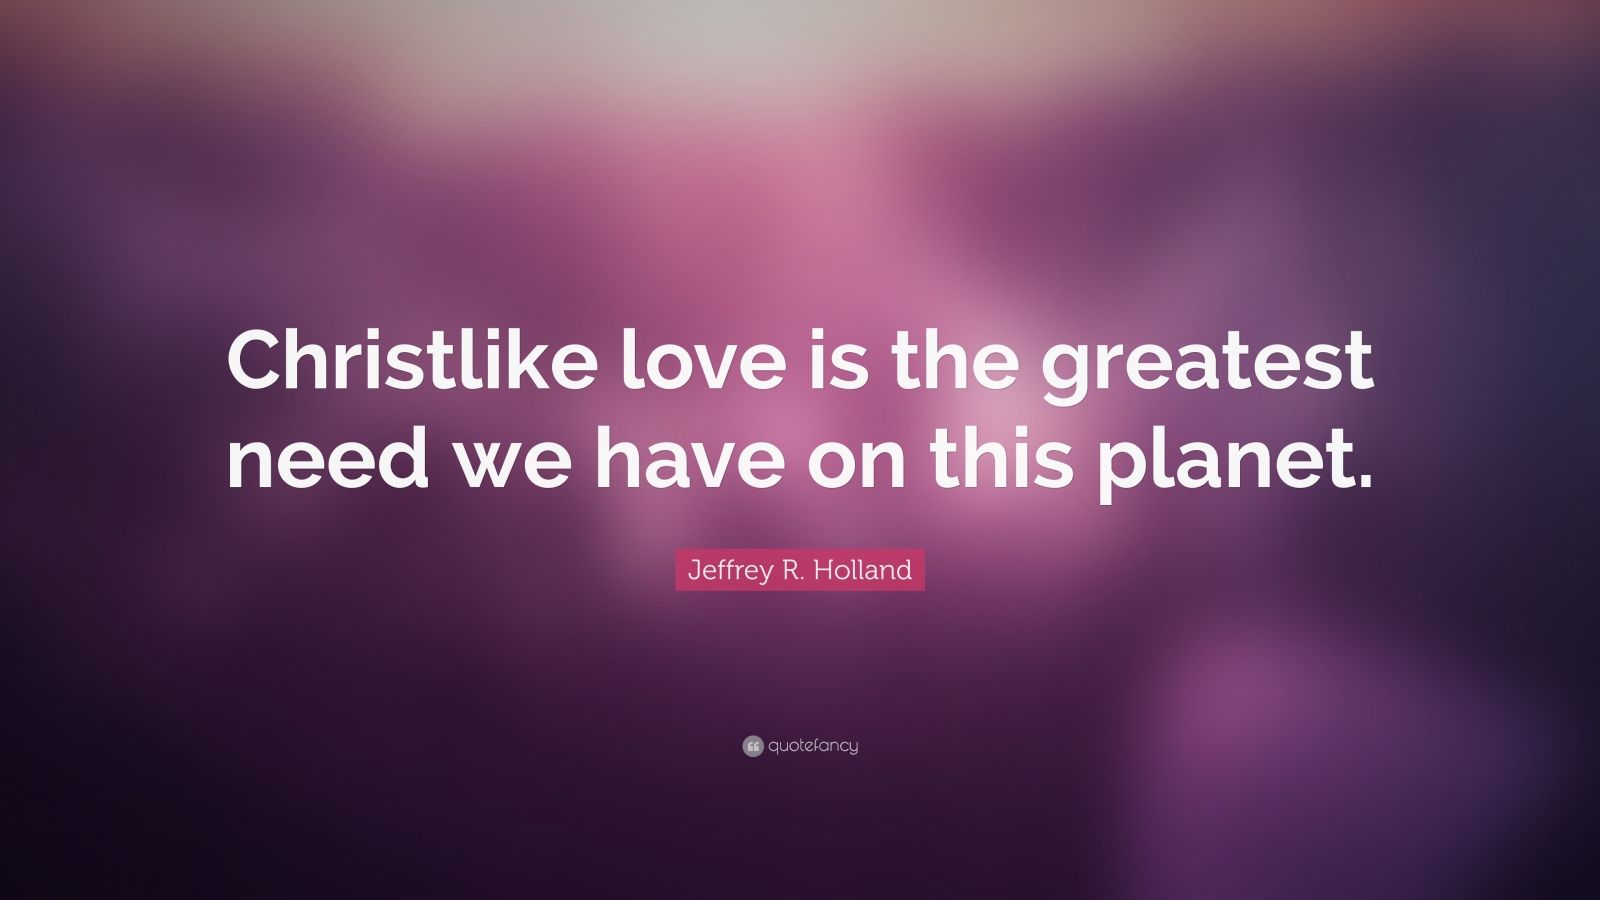 Jeffrey R Holland Quote “Christlike love is the greatest need we have on